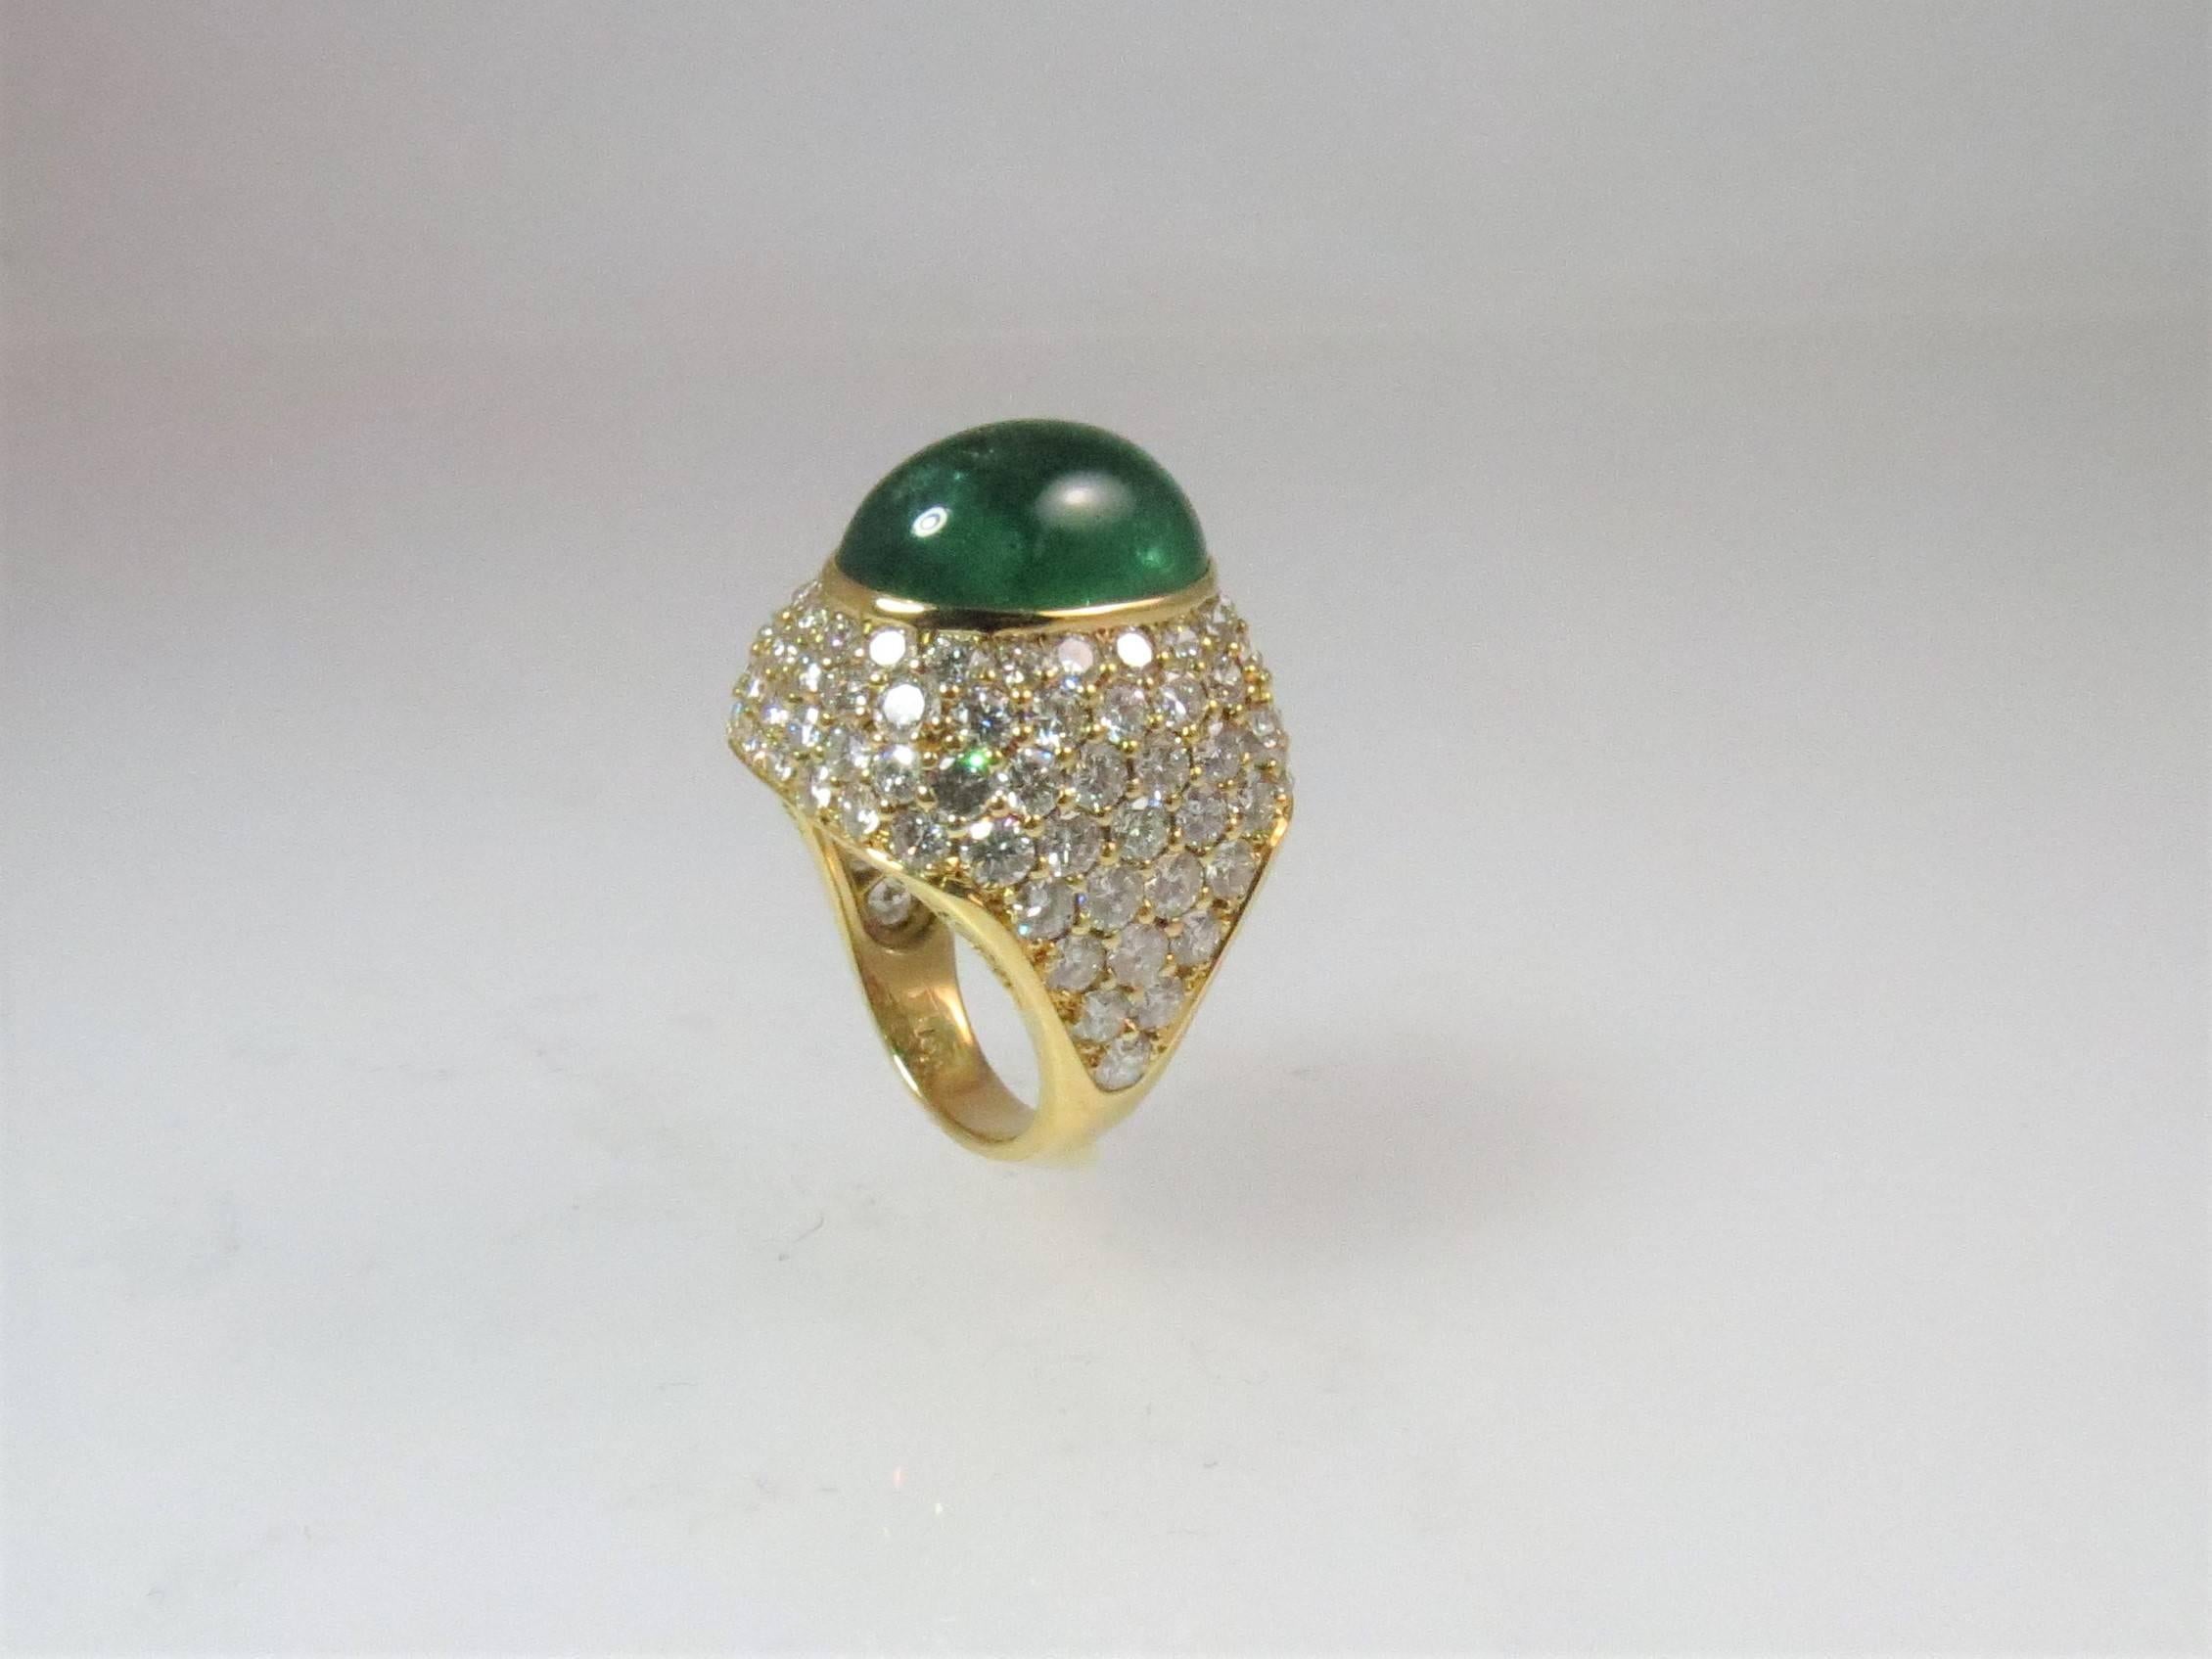 Montreaux 18K yellow gold ring, with 124 full cut round diamonds set in platinum, weighing 8.31cts, D-E color, IF-VS clarity, set in center with one Cabochon emerald weighing 13.01cts
Finger size 6, may be sized.